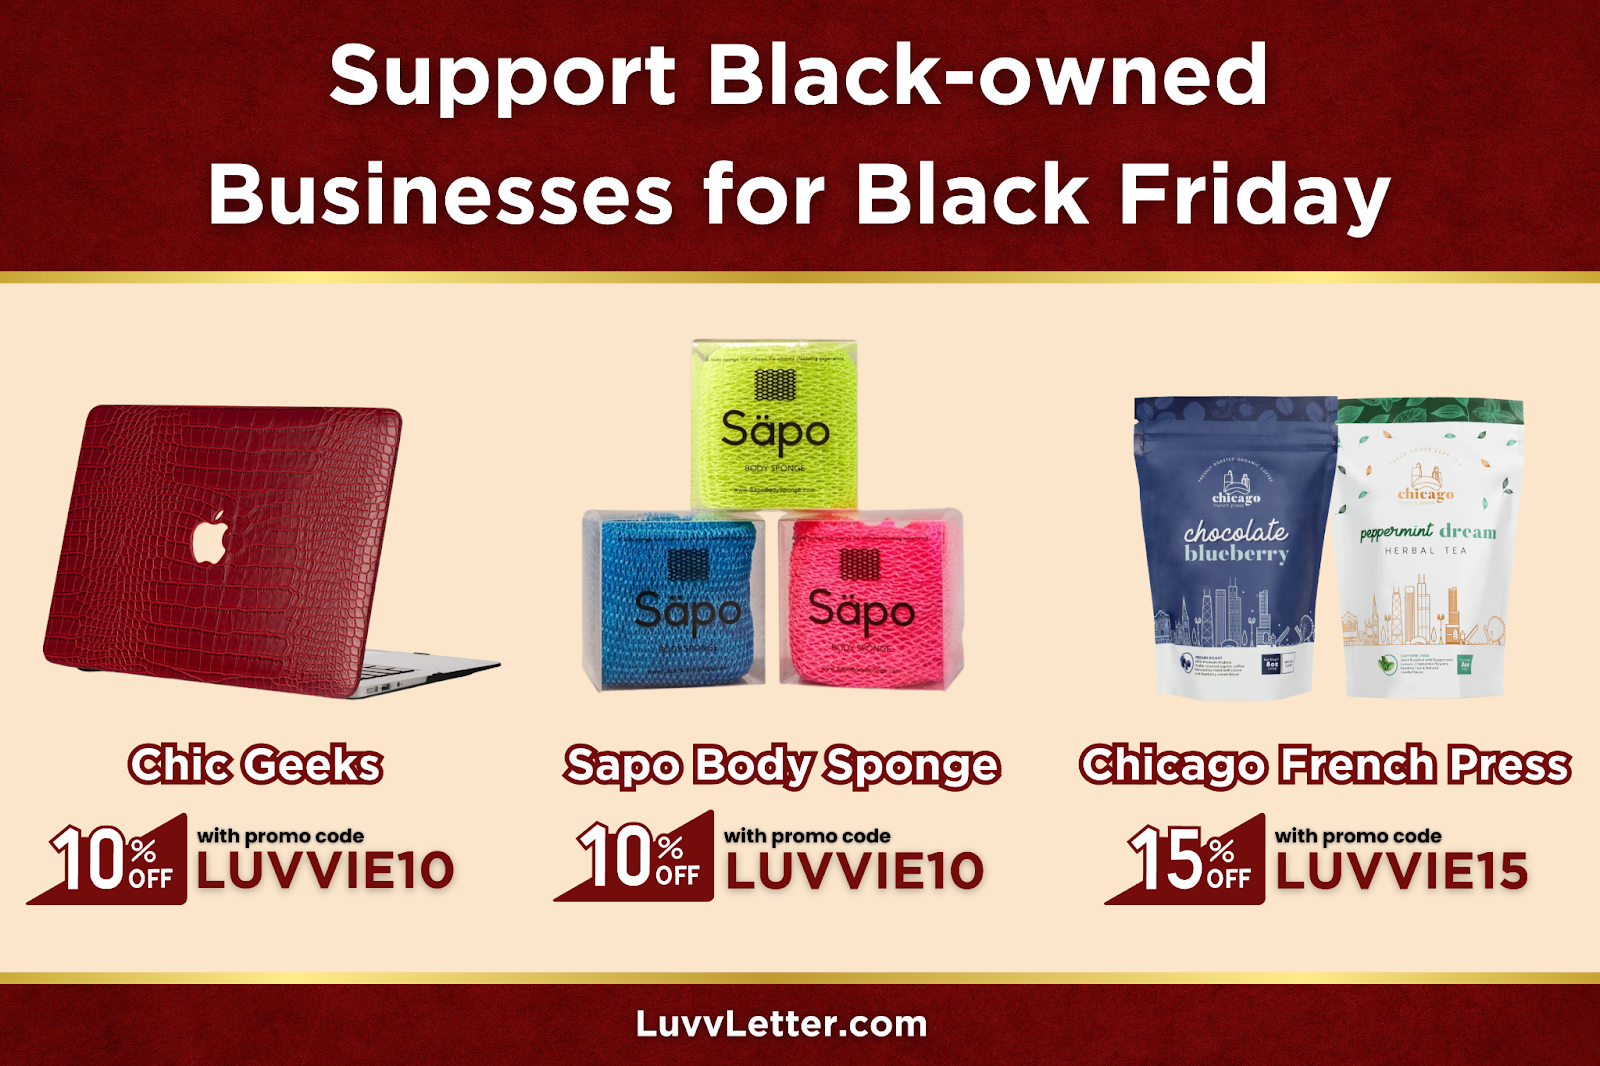 Support black-owned businesses for Black Friday